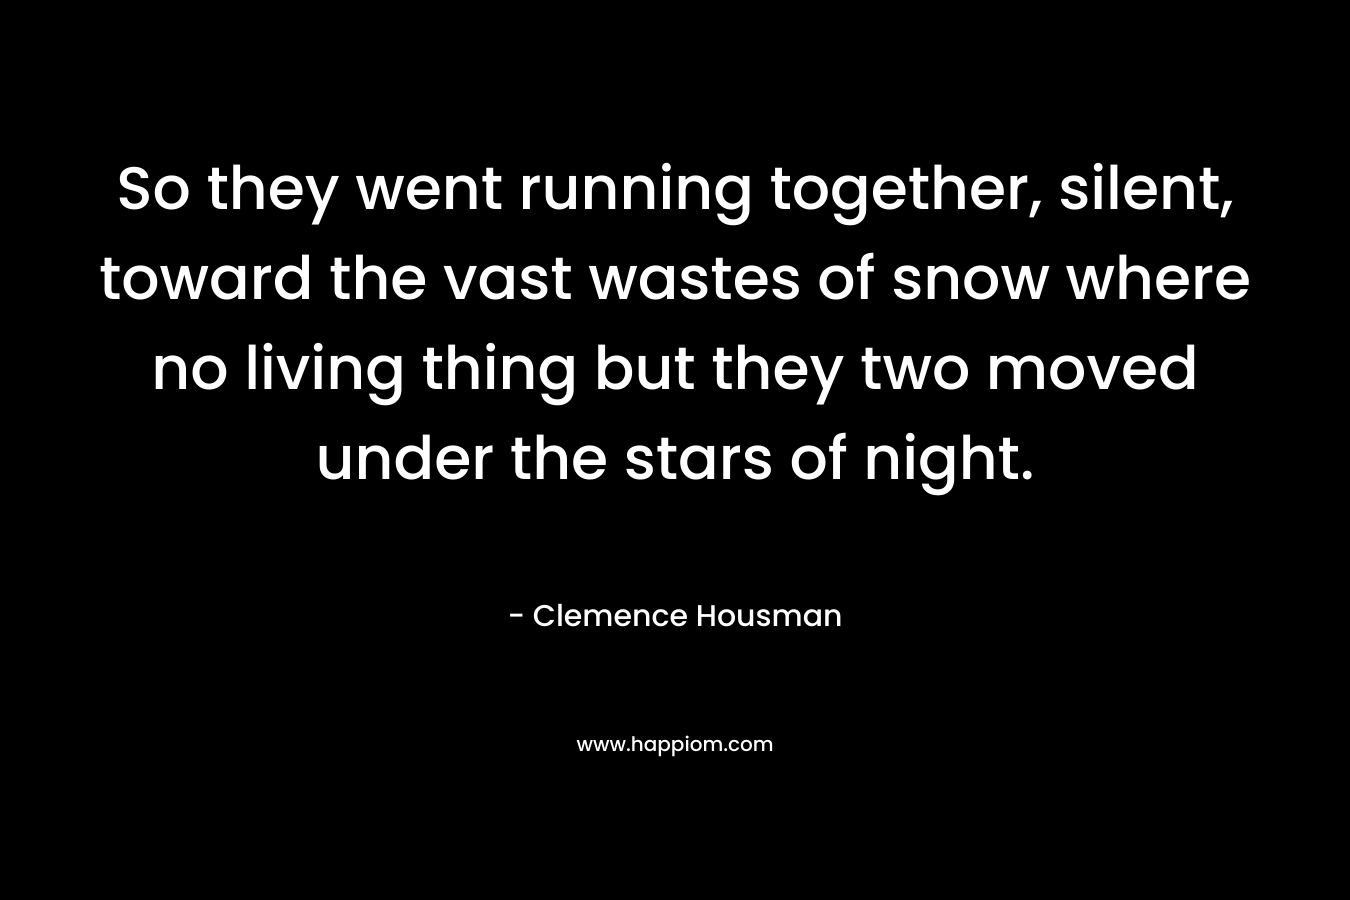 So they went running together, silent, toward the vast wastes of snow where no living thing but they two moved under the stars of night. – Clemence Housman